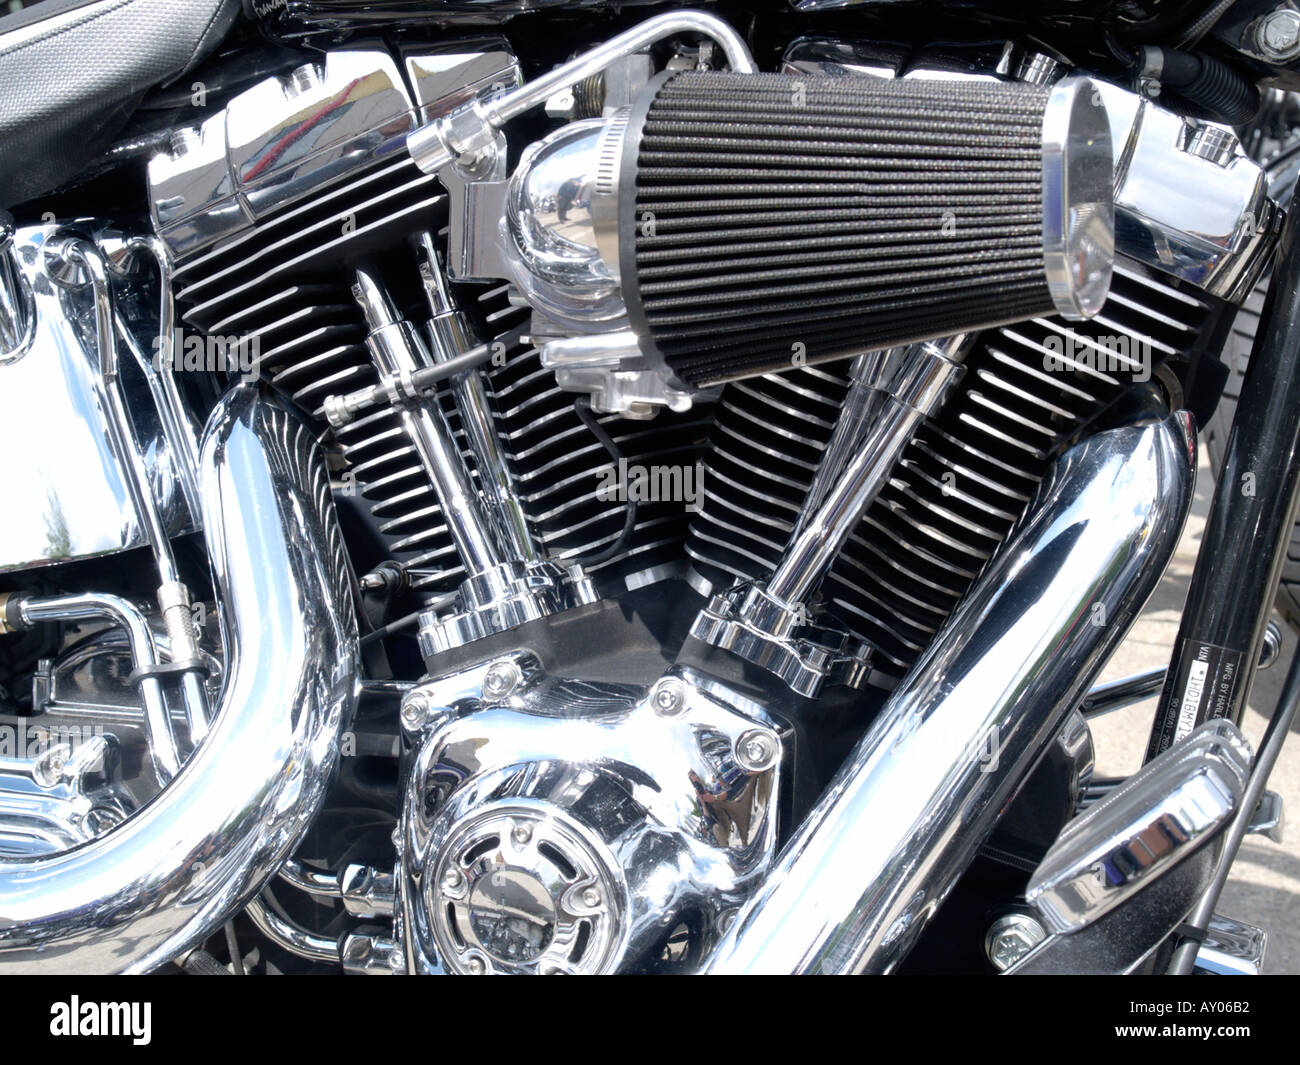 Shiny polished Harley Davidson v twin engine with lots of chrome and an aftermarket air filter Stock Photo